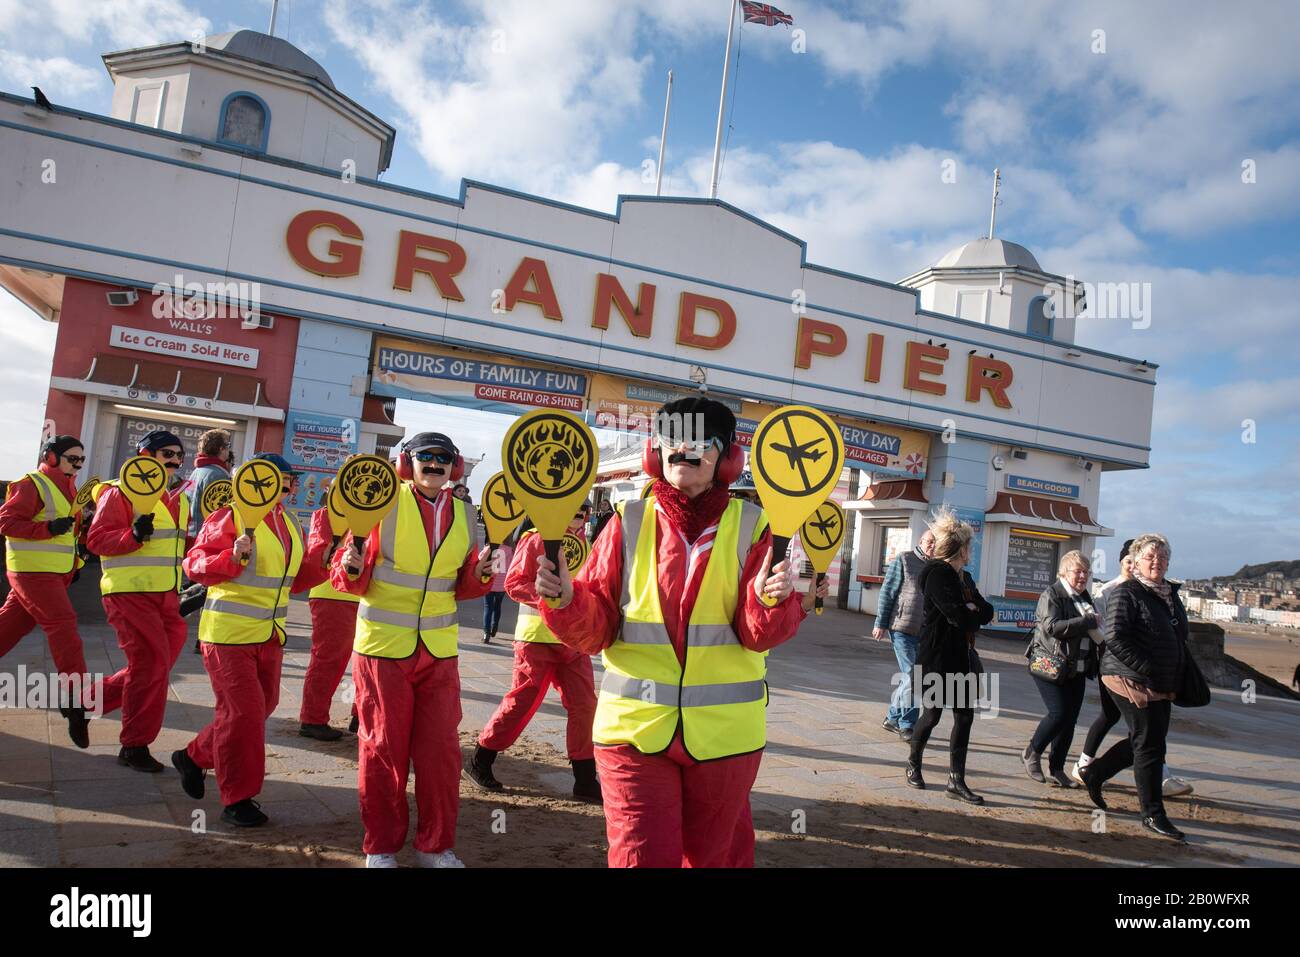 Weston-super-Mare, North Somerset, UK. 8th February 2020. Pictured:  Protesters dressed as air traffic controllers march past Weston-super-Mare's Gran Stock Photo